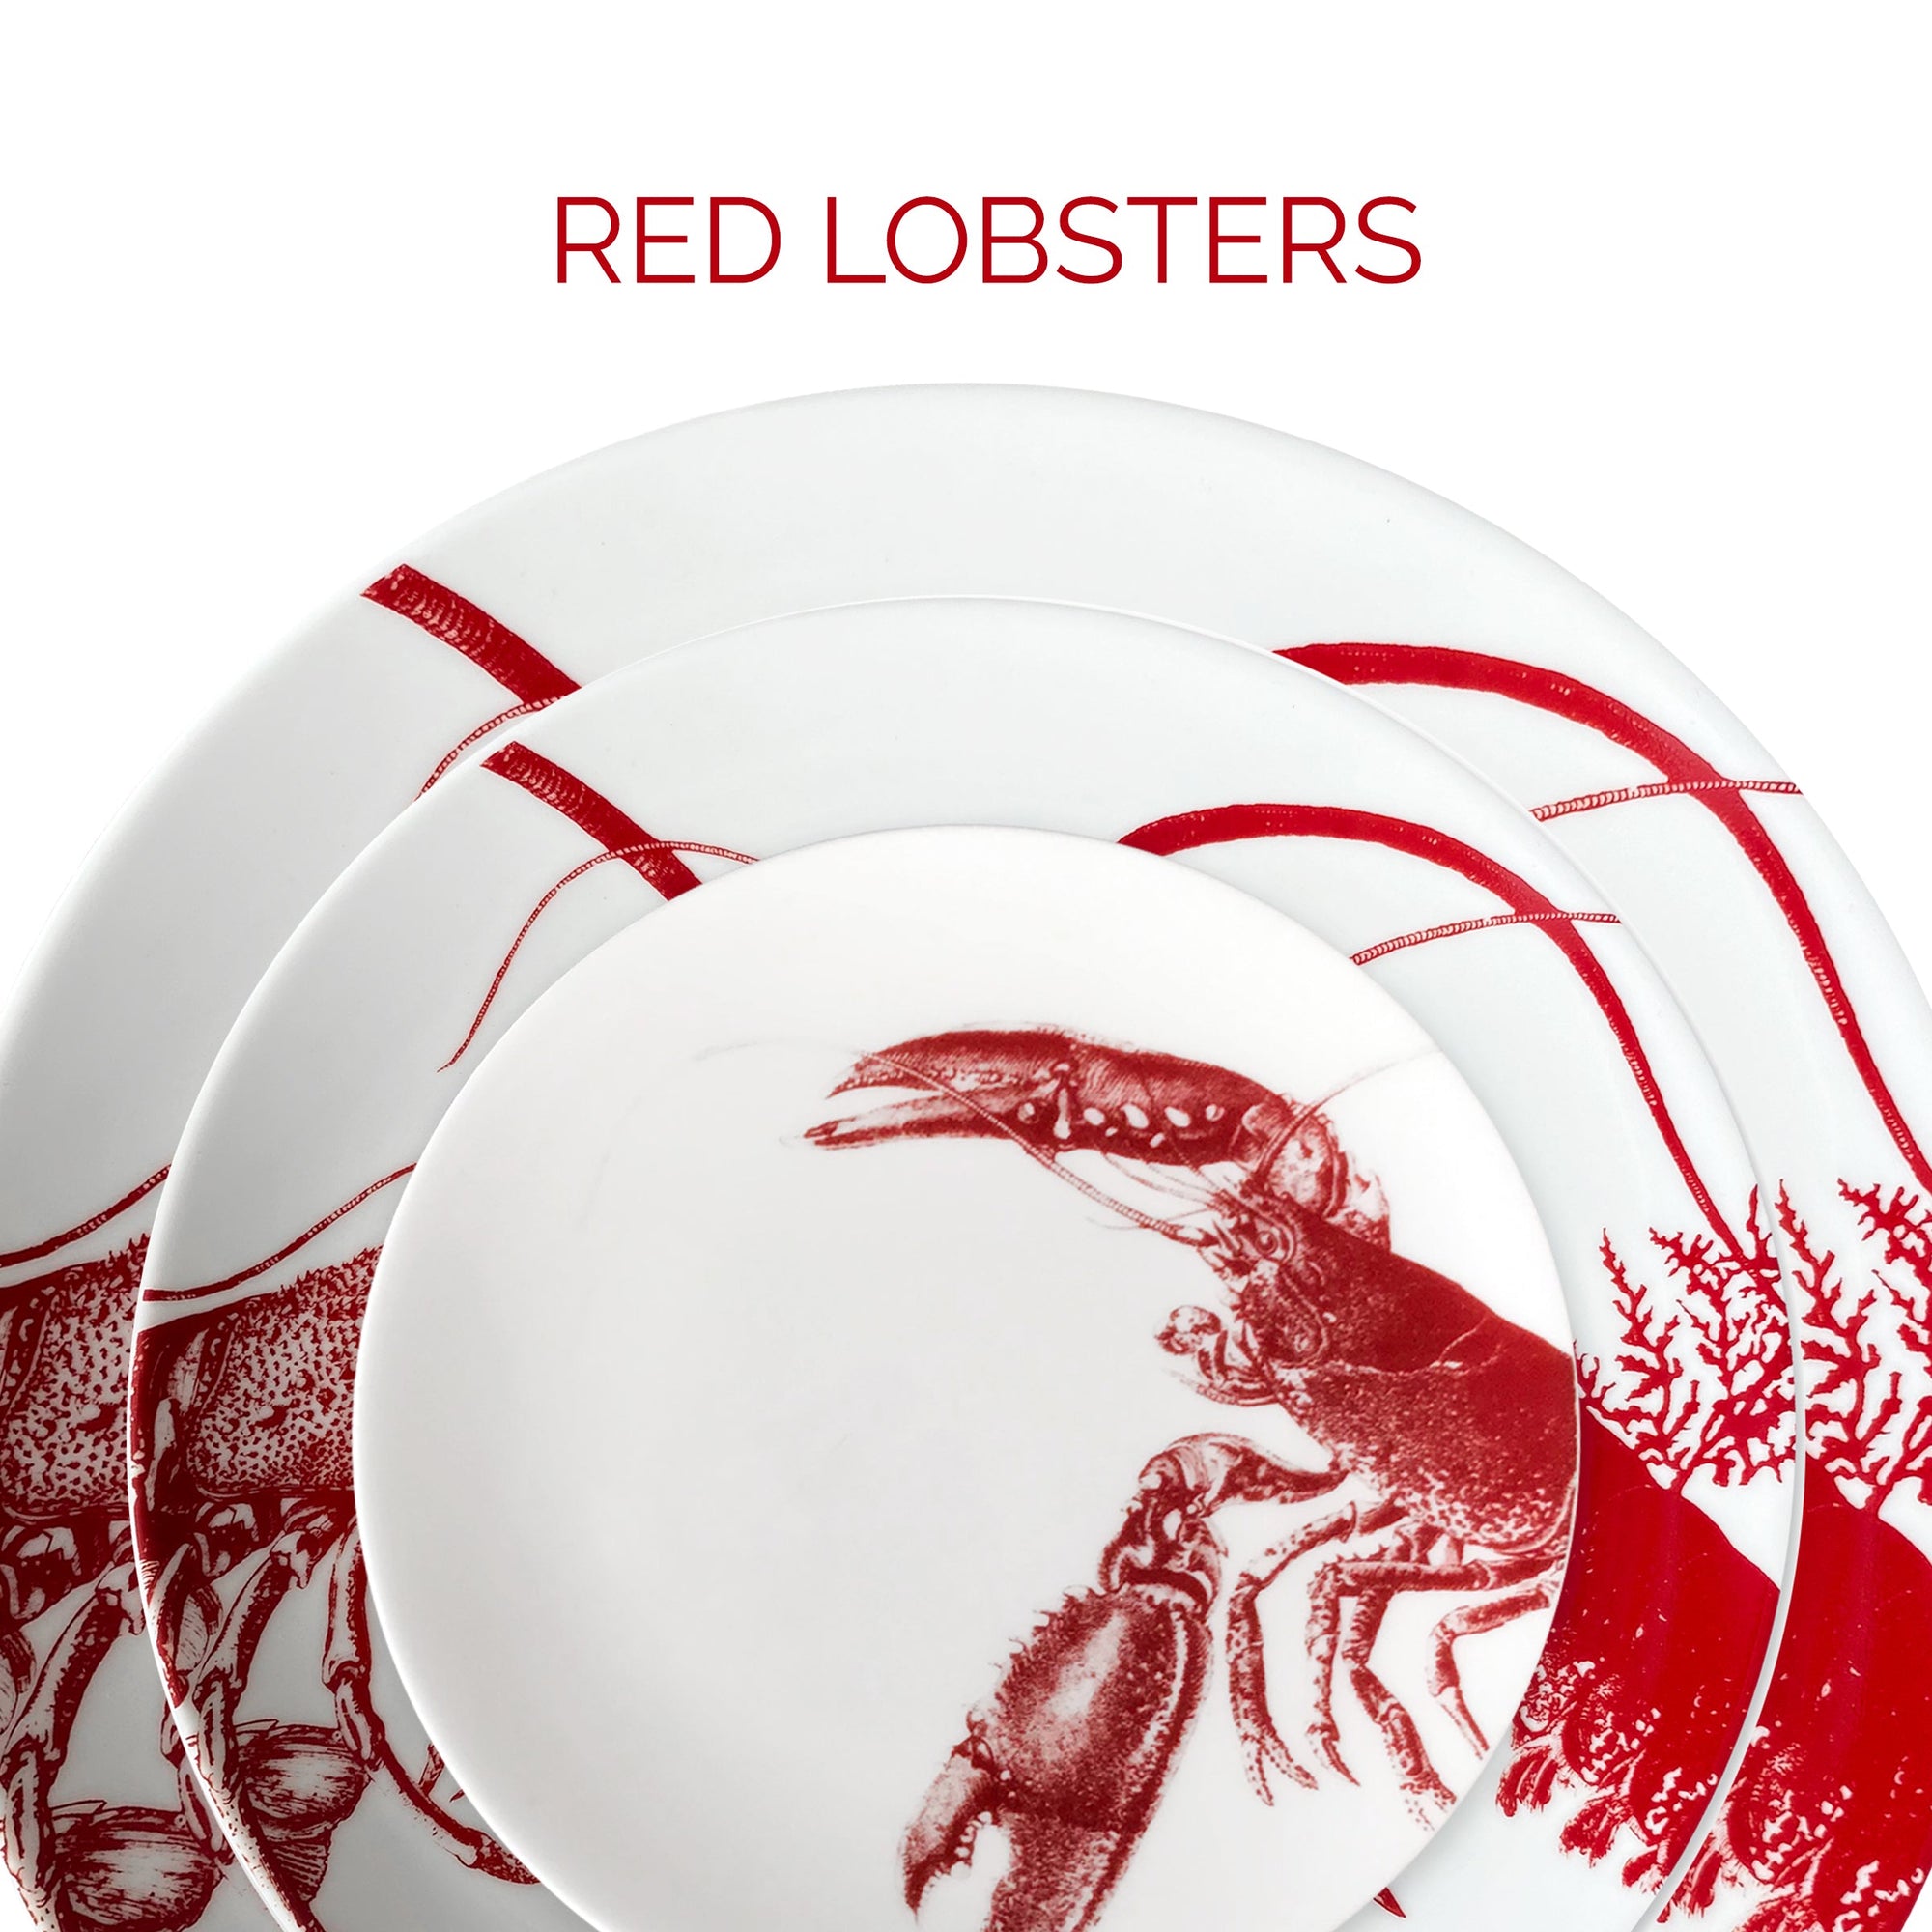 Stack of white plates with red lobster designs, some featuring detailed images of lobsters and others with red coral patterns, titled "red lobsters.